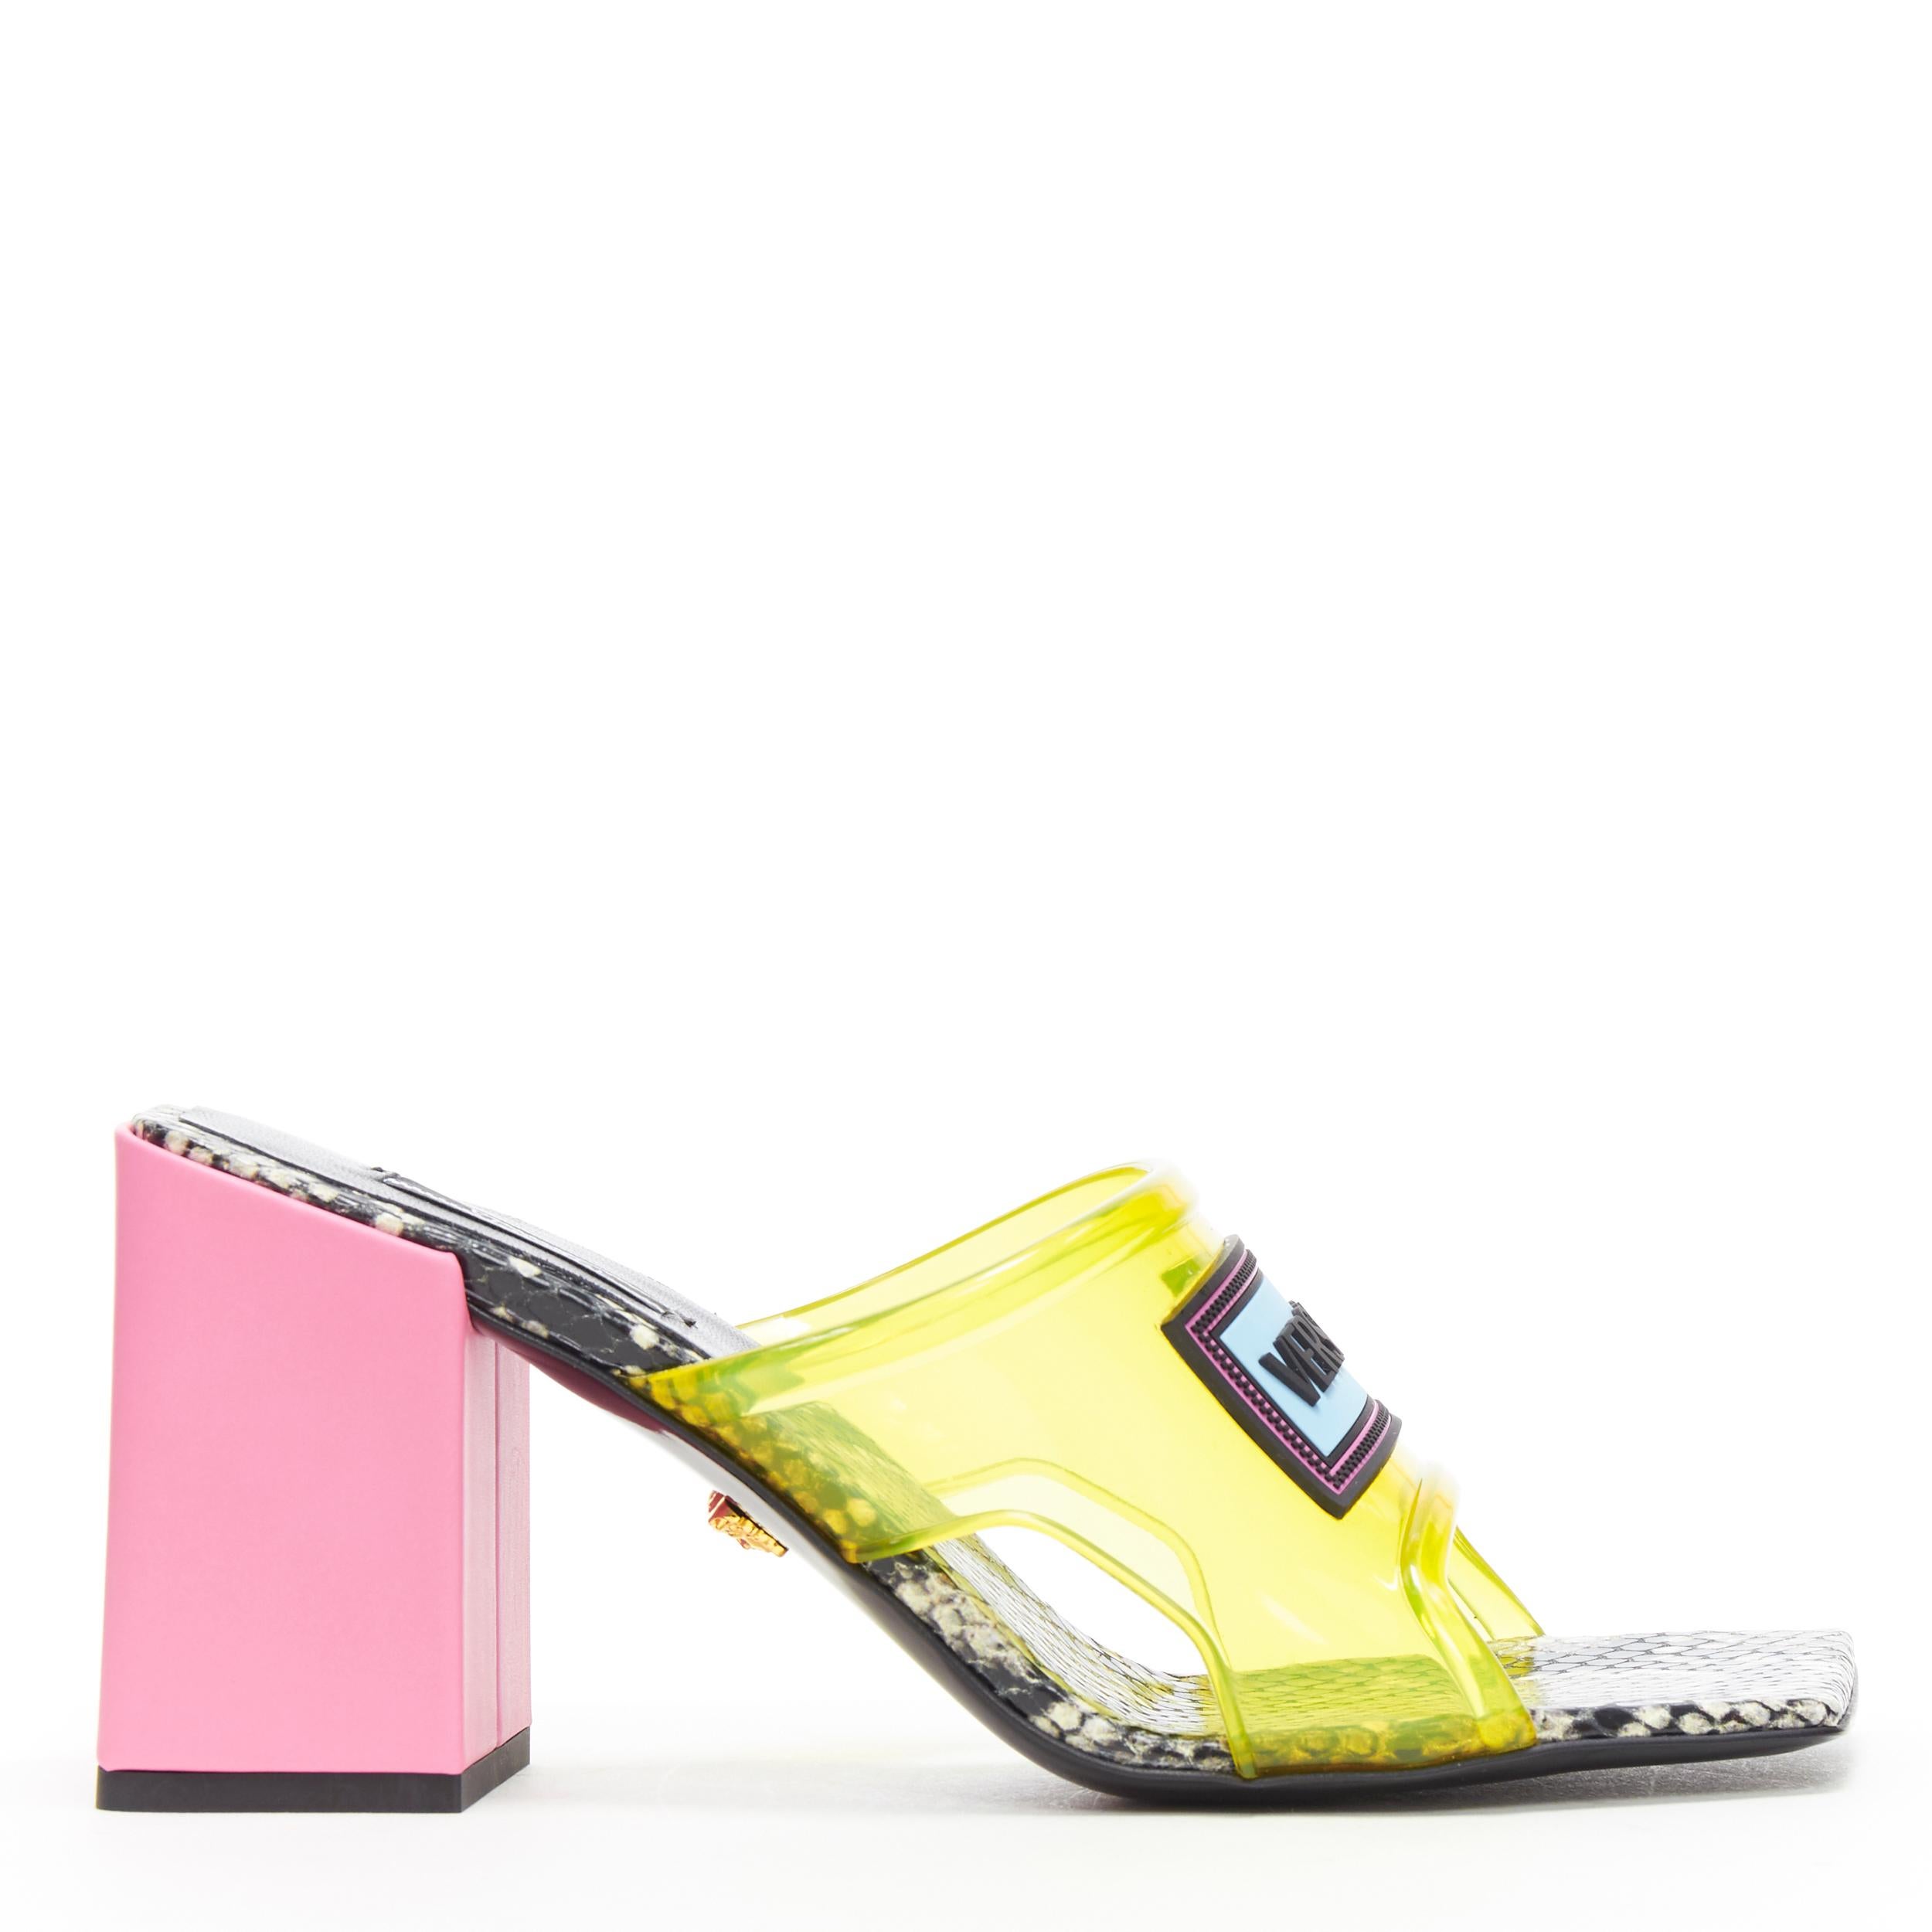 new VERSACE Runway 1990s Vintage Logo yellow PVC pink block heel sandals EU39
Brand: Versace
Designer: Donatella Versace
Collection: 2019
As seen on: Kylie Jenner
Model Name / Style: Mule sandals
Material: PVC
Color: Pink, yellow
Pattern: